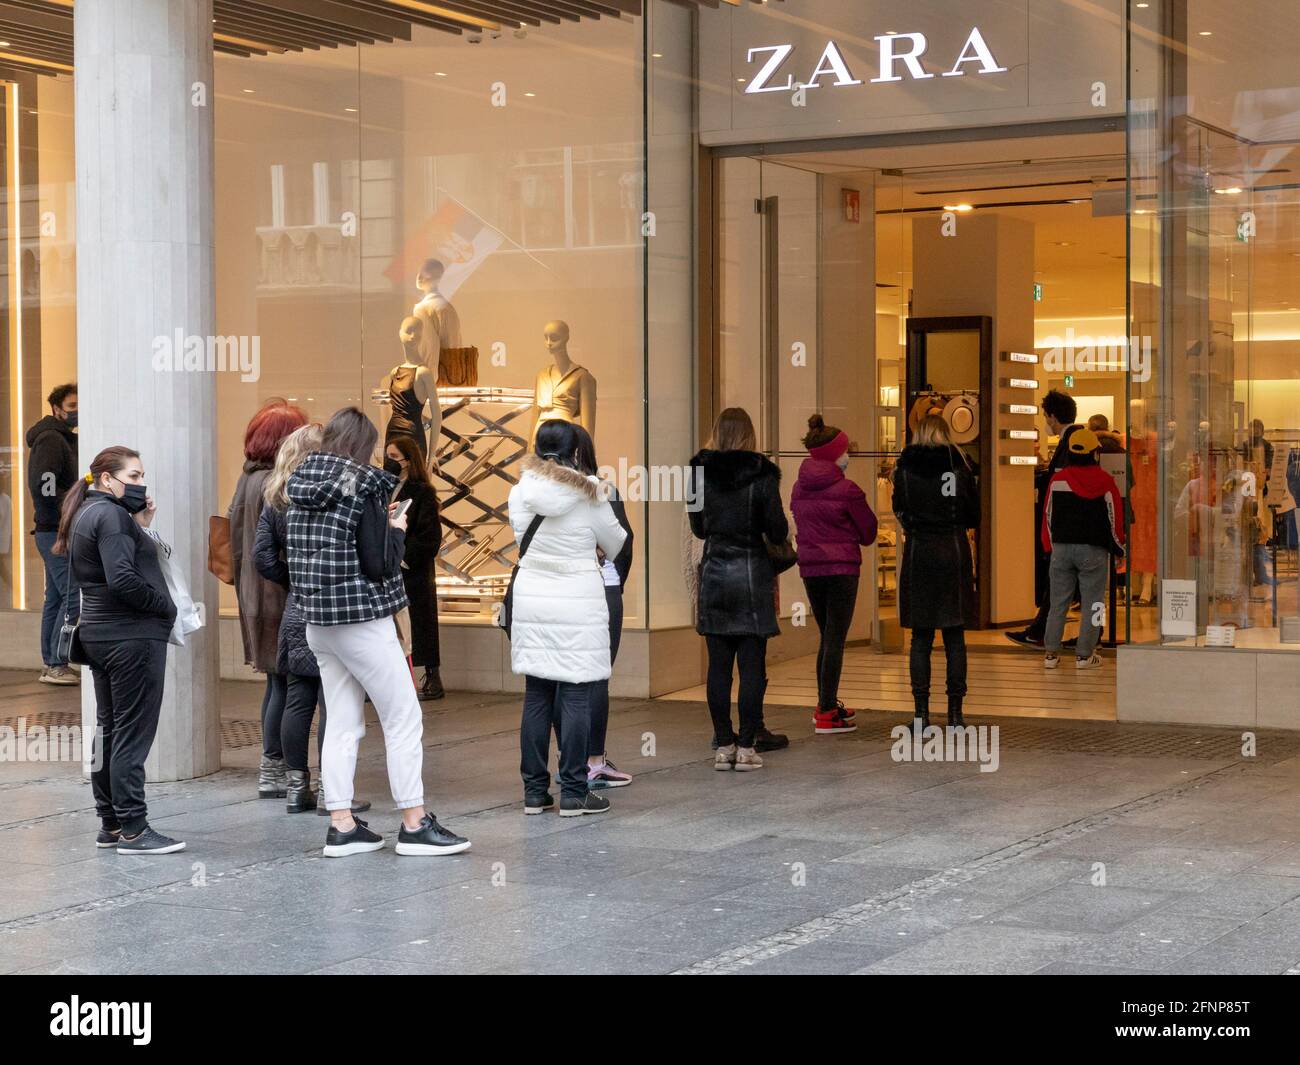 Belgrade, Serbia - March 23, 2021: People waiting in line in frount of Zara  store in Belgrade. Limited number of customers due to coronavirus pandemic  Stock Photo - Alamy